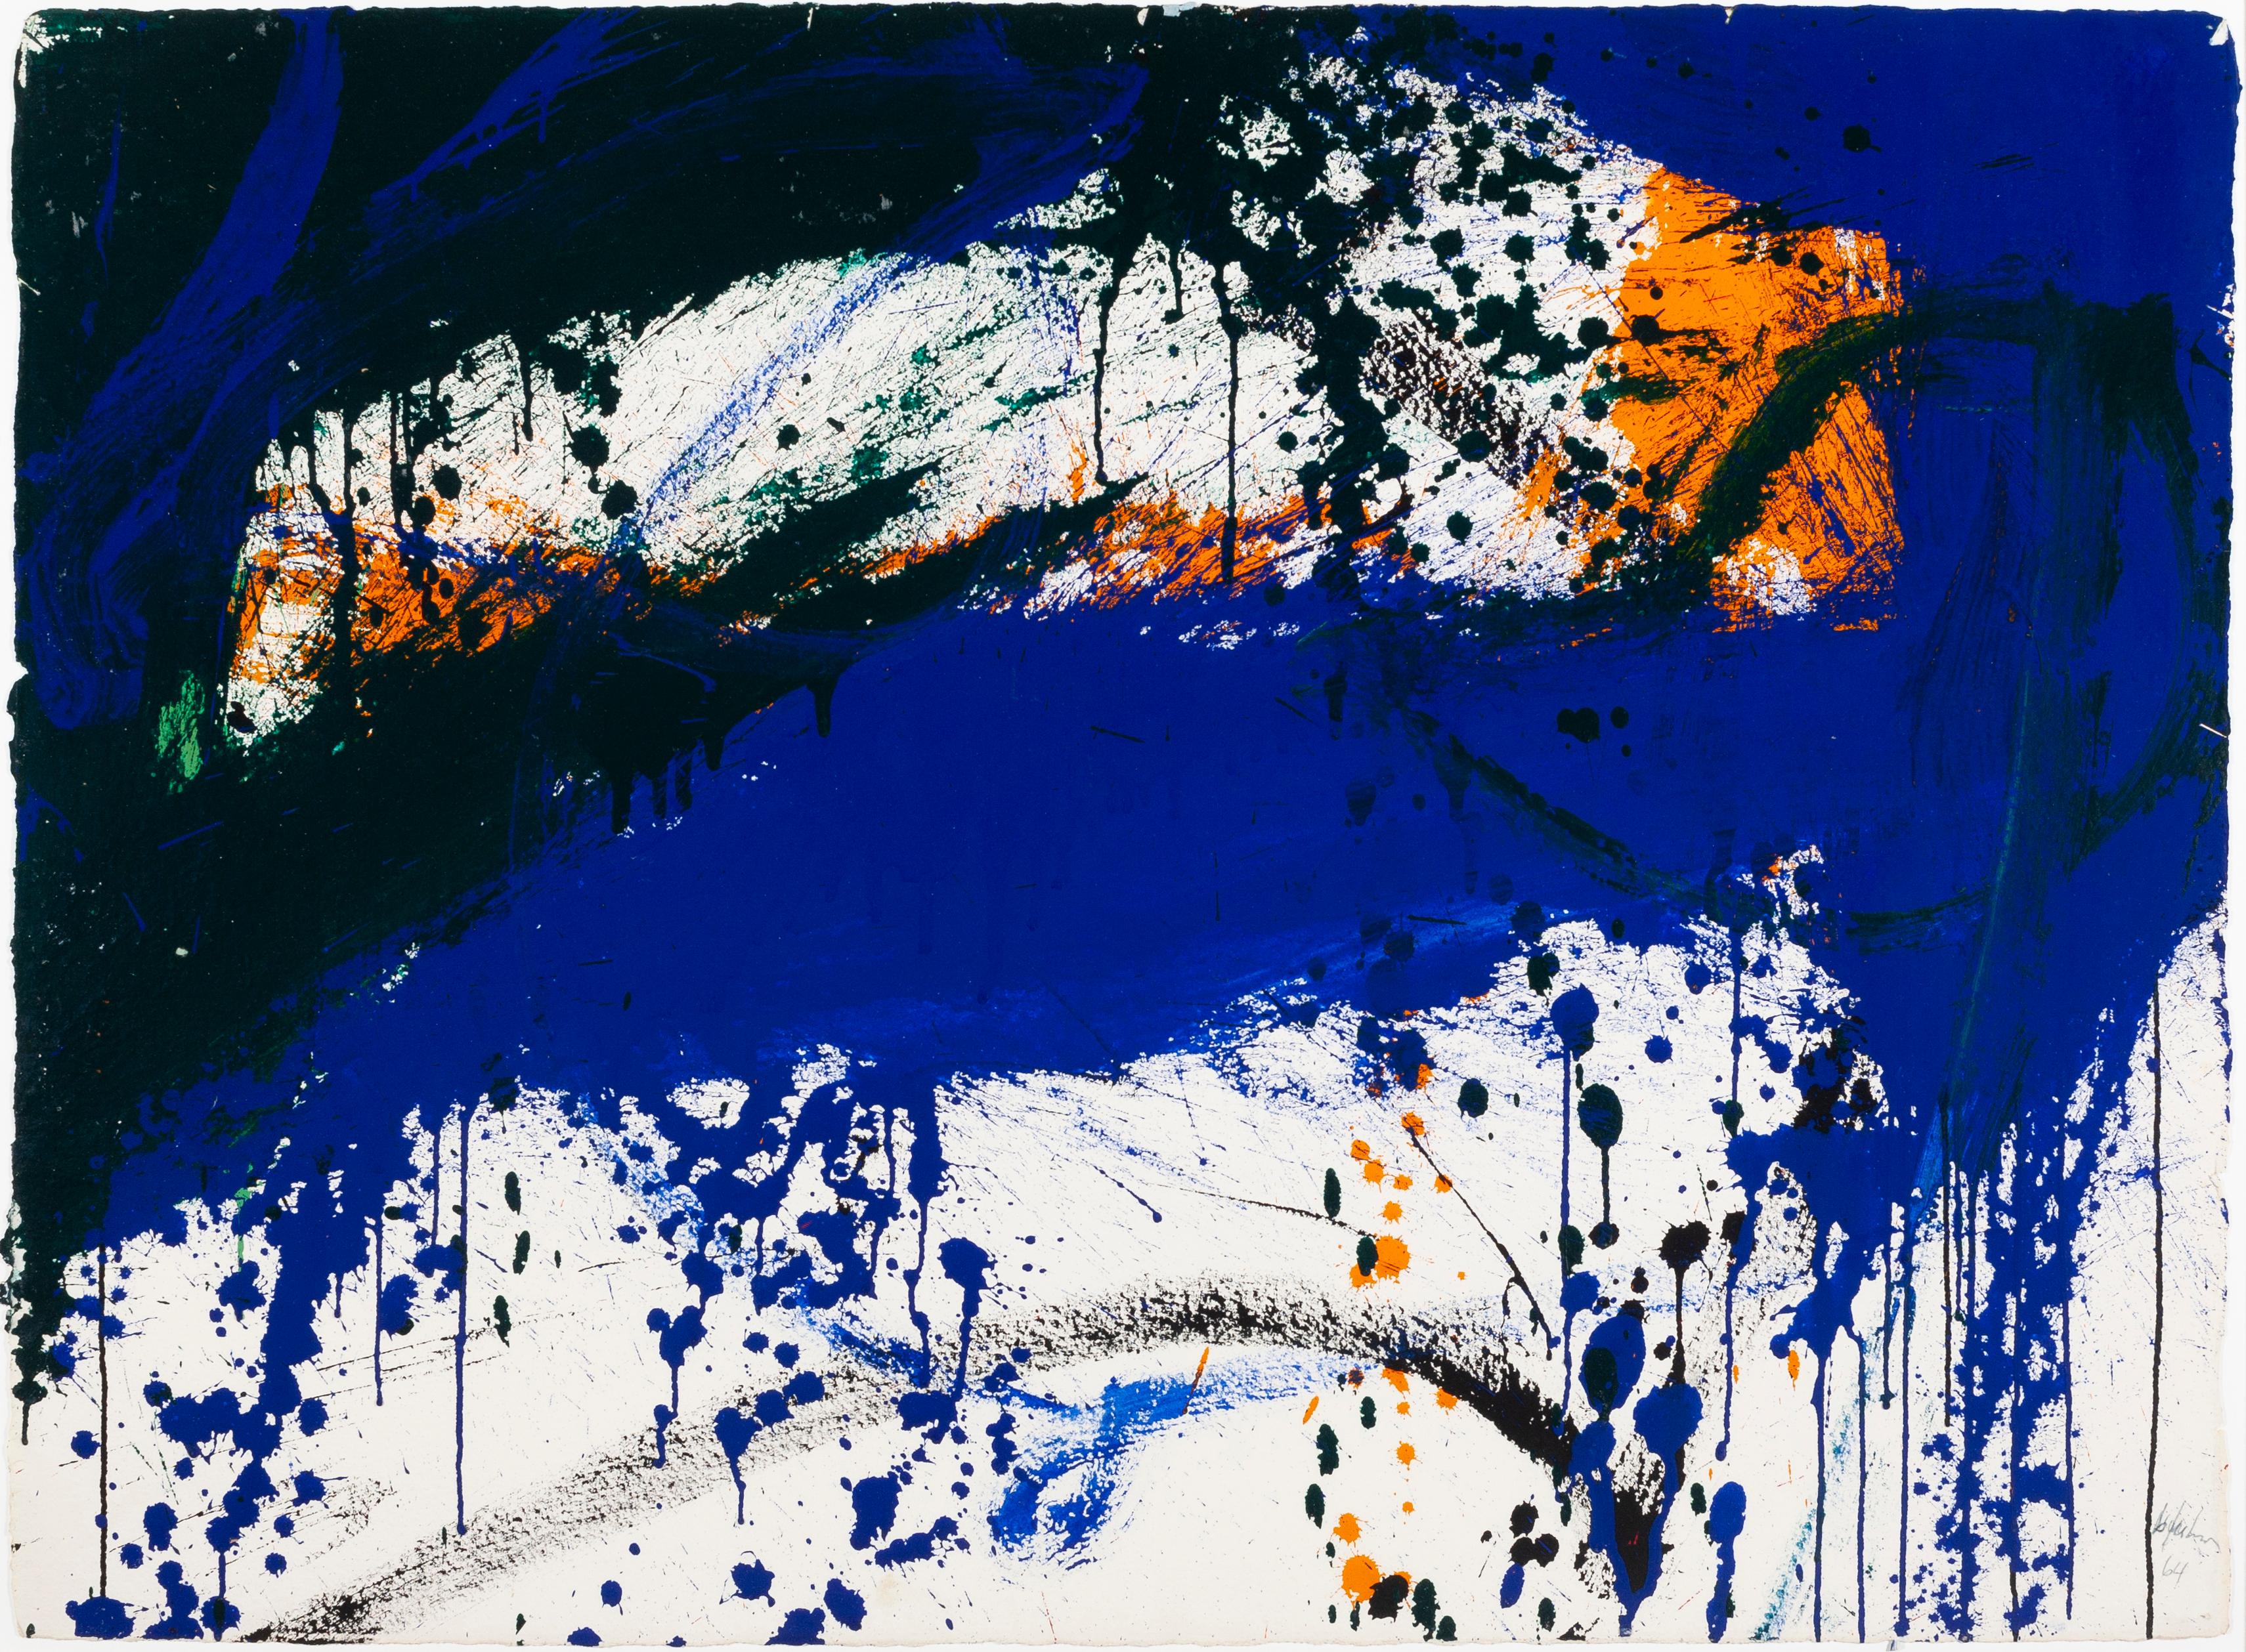 Sweet Sue - Painting by Norman Bluhm